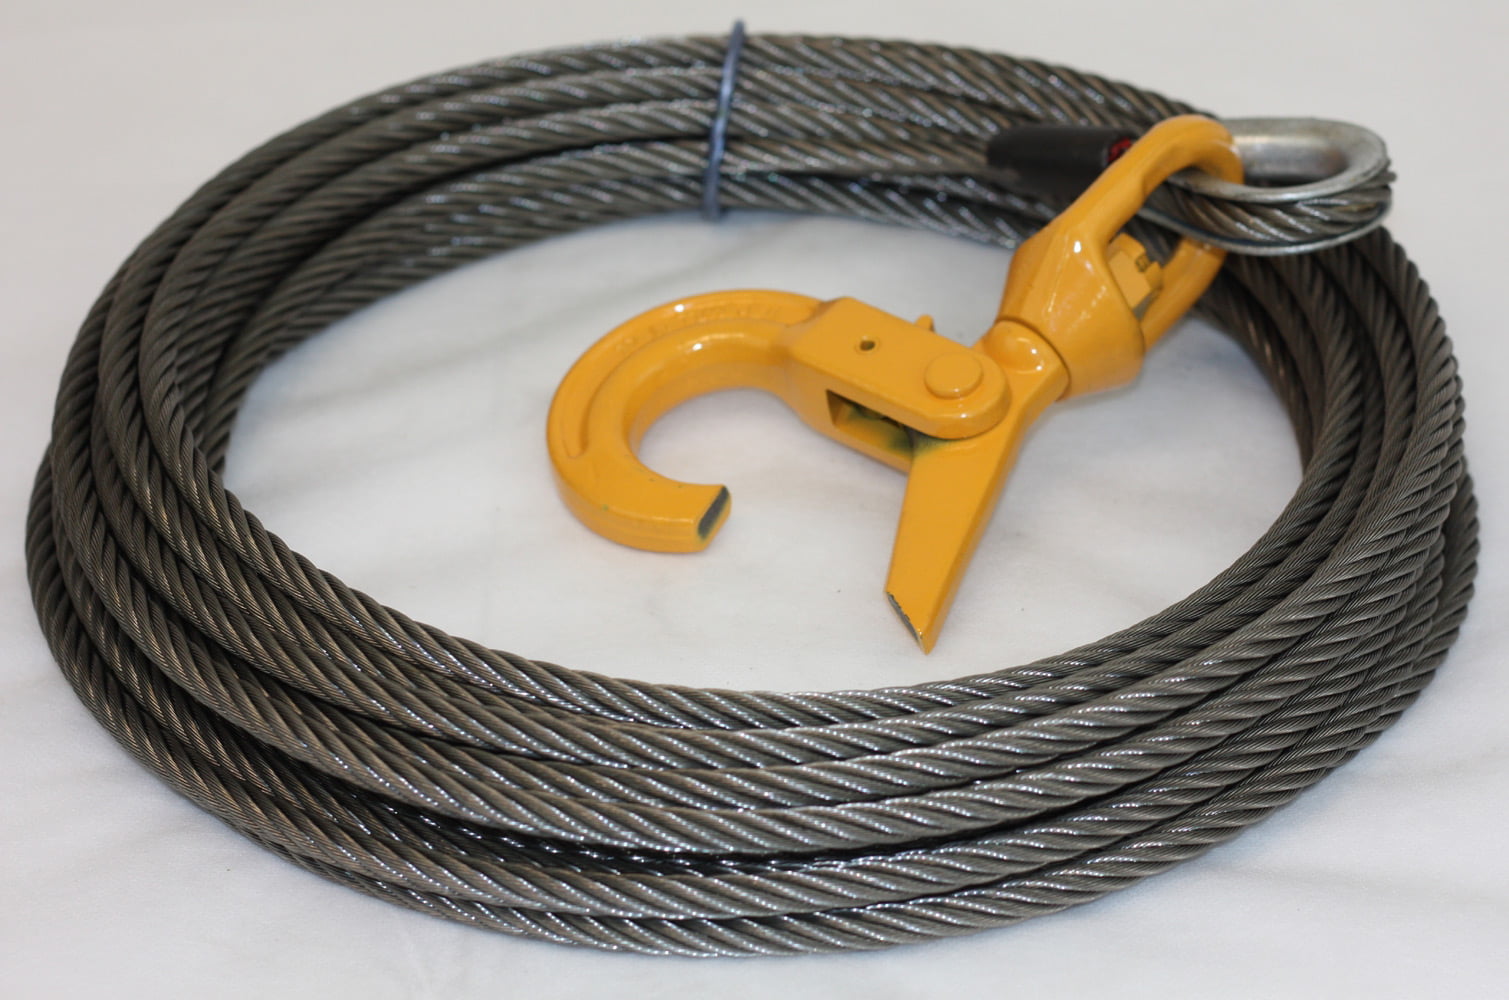 1/2" x 125' Fiber Core Winch Line Wrecker Tow Cable w/ Fixed Hook & Latch Truck 